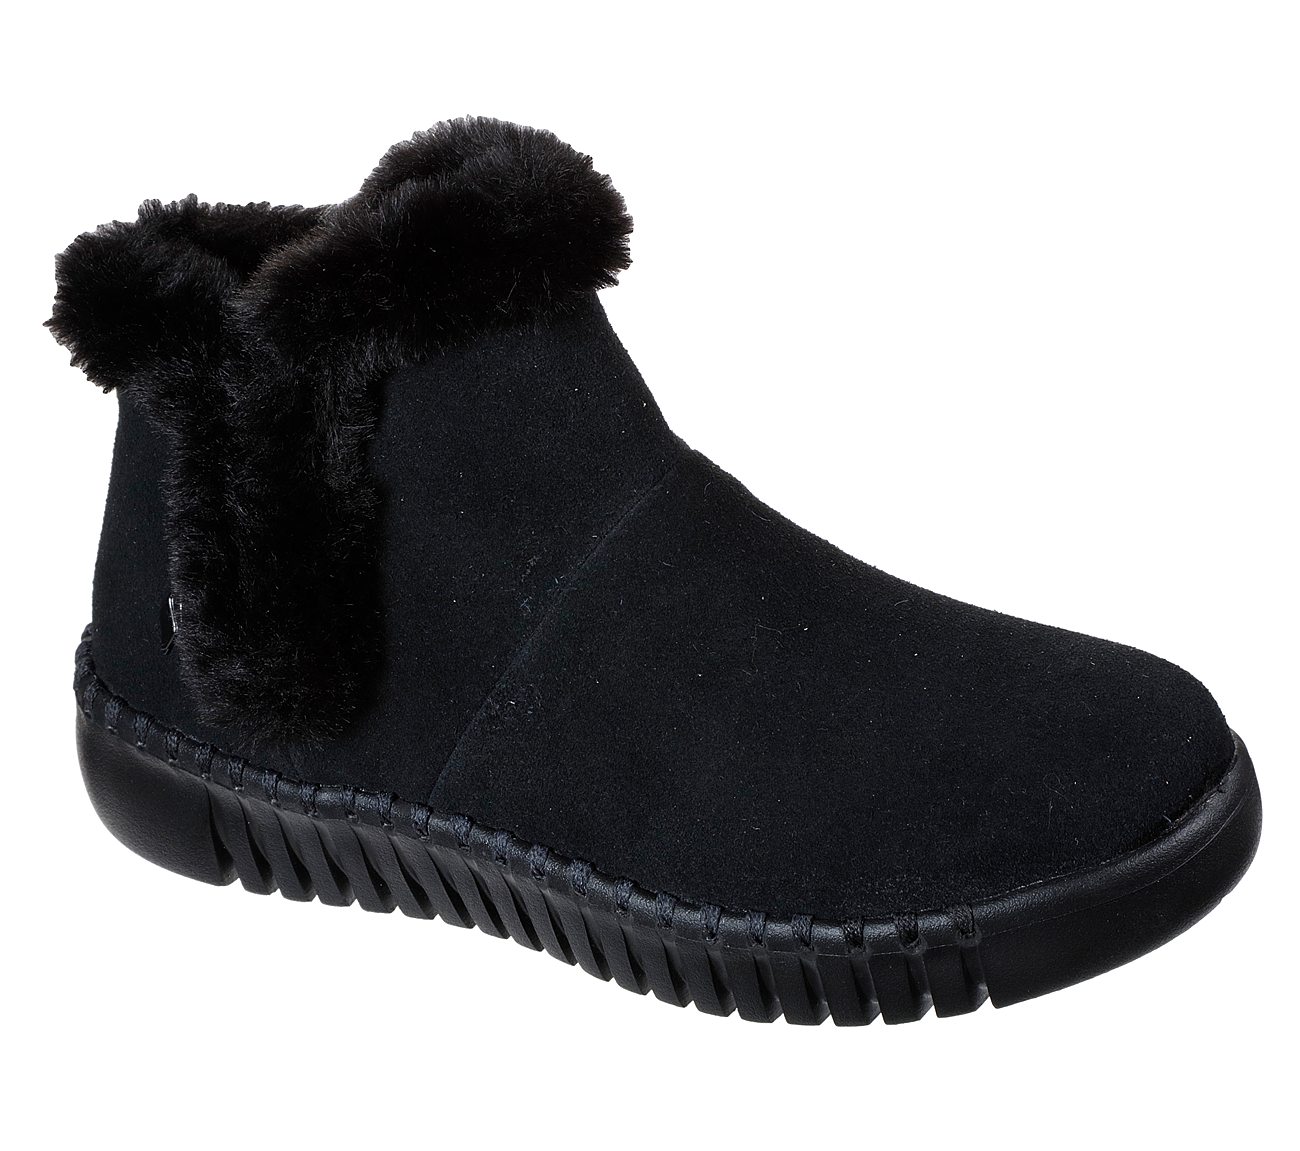 skechers gowalk suede and faux fur boots - stunning